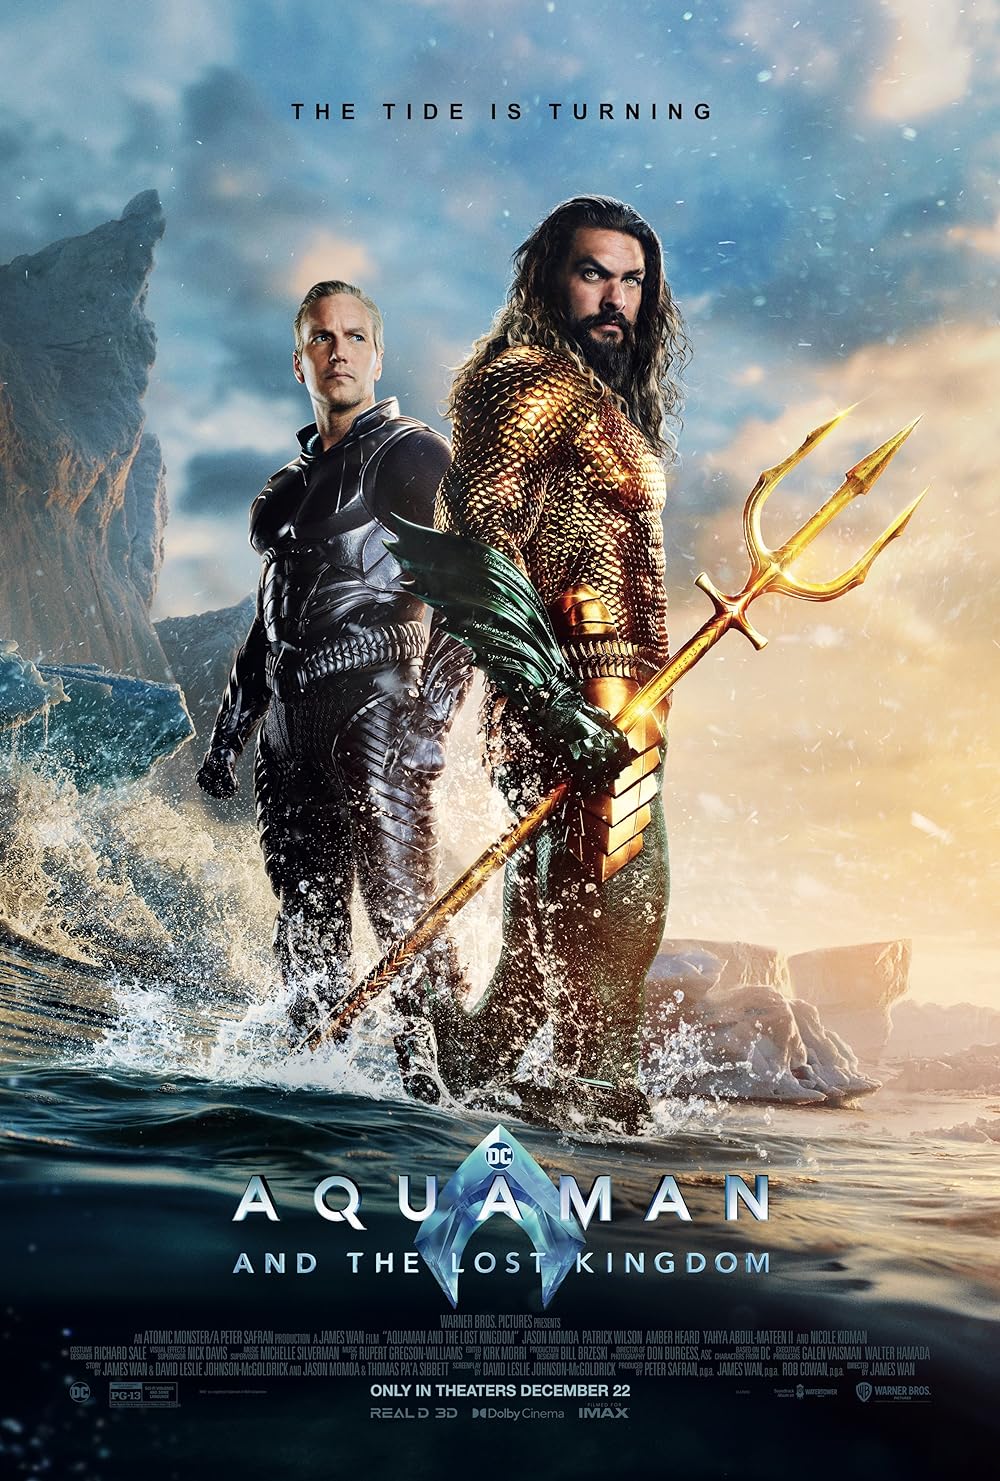 Aquaman and the Lost Kingdom (February 5) - Available on BookMyShow StreamAquaman and the Lost Kingdom is a sequel to the 2018’s Aquaman, where Arthur Curry/Aquaman (Jason Momoa) faces the resurgence of his nemesis, Black Manta (Yahya Abdul-Mateen II). Seeking vengeance for his father’s death, Black Manta wields the formidable power of the Black Trident. In the face of this threat, Arthur forms an uneasy alliance with his estranged half-brother, Orm (Patrick Wilson). Together, they combine their strengths to defend Atlantis against Black Manta’s wrath and a looming ancient force that threatens their world.